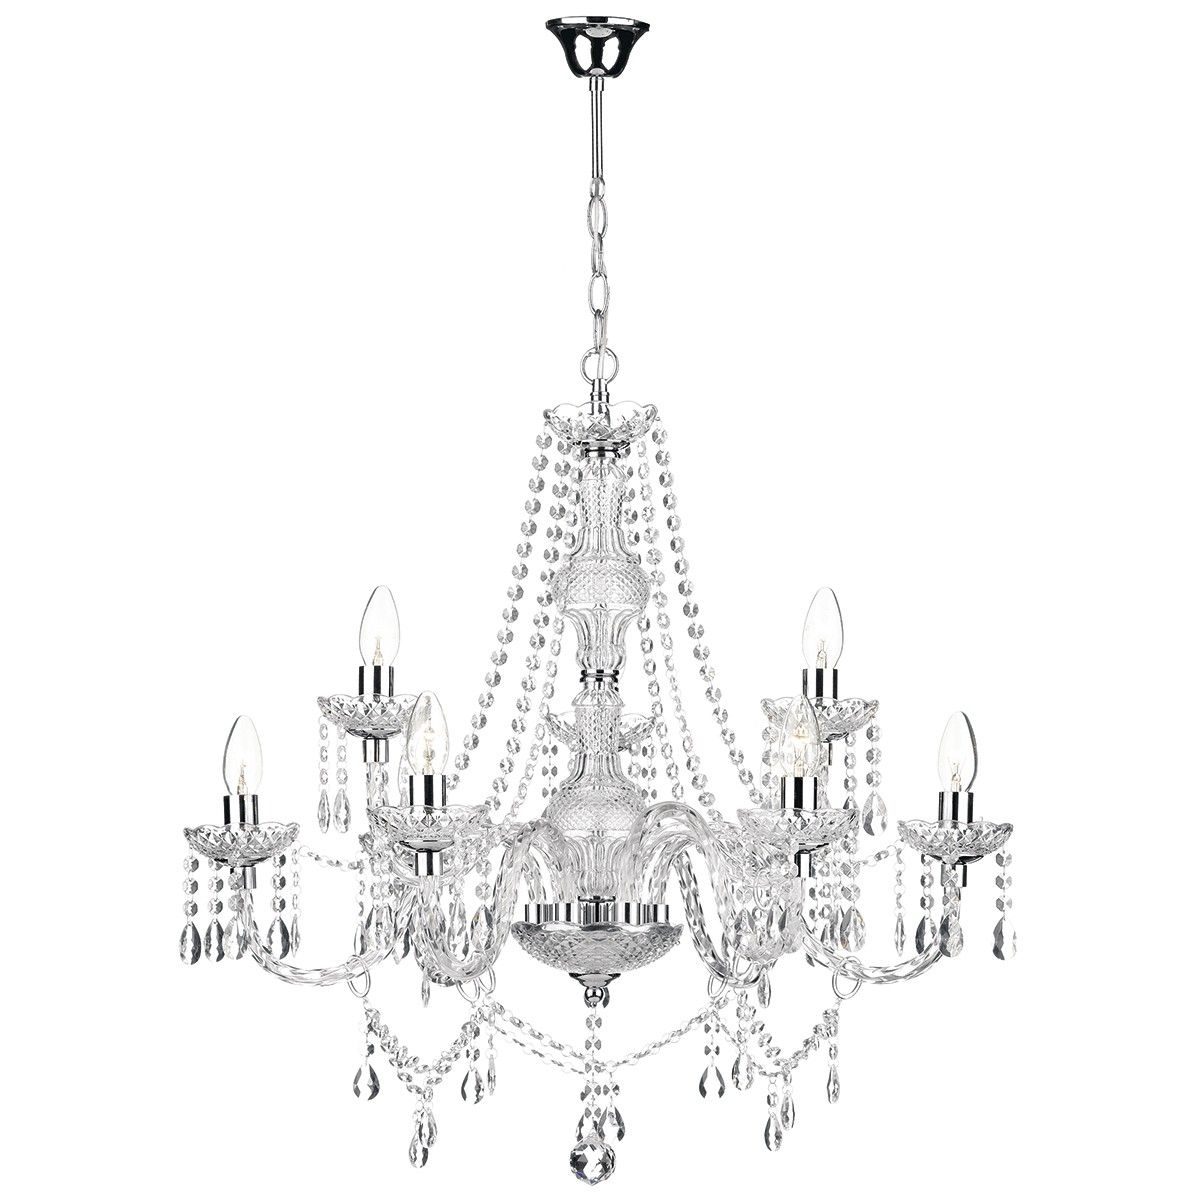 9 Light Chandelier Polished Chrome Acrylic Glass Intended For Chrome And Glass Chandelier (View 2 of 12)